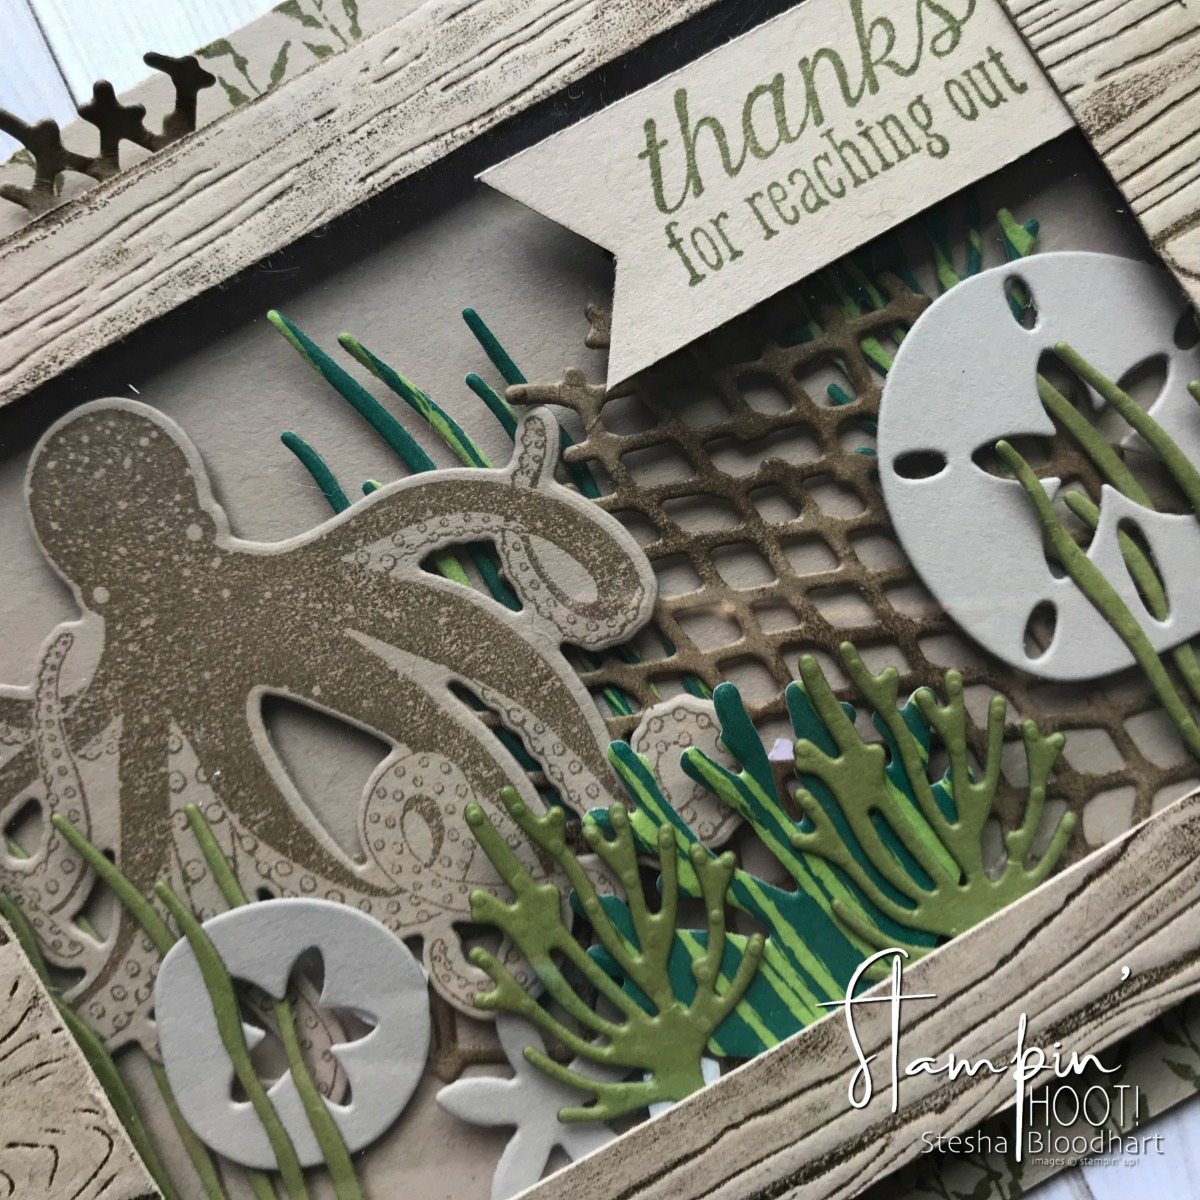 Sea of Textures Bundle by Stampin' Up! for the Stamp Review Crew Design Team Blog Hop. Thank You Card Created by Stesha Bloodhart, Stampin' Hoot! #steshabloodhart #stampinhoot